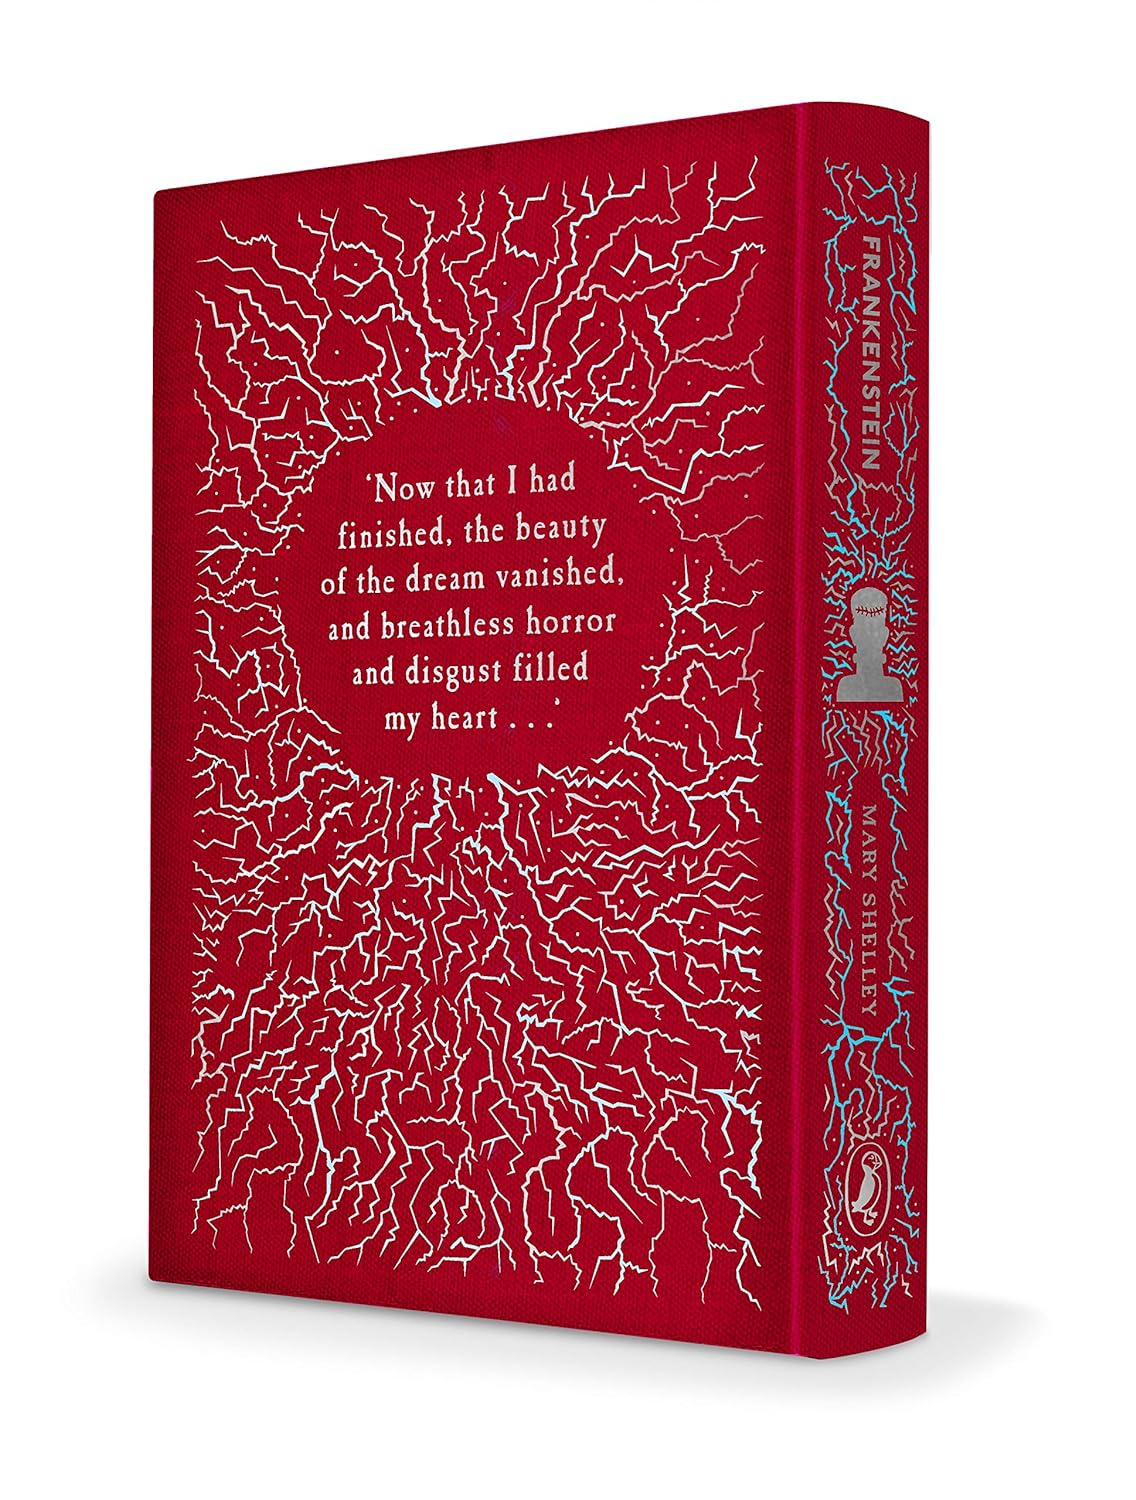 Frankenstein by Mary Shelley - Puffin Clothbound Classics Edition - Looking Glass Books -